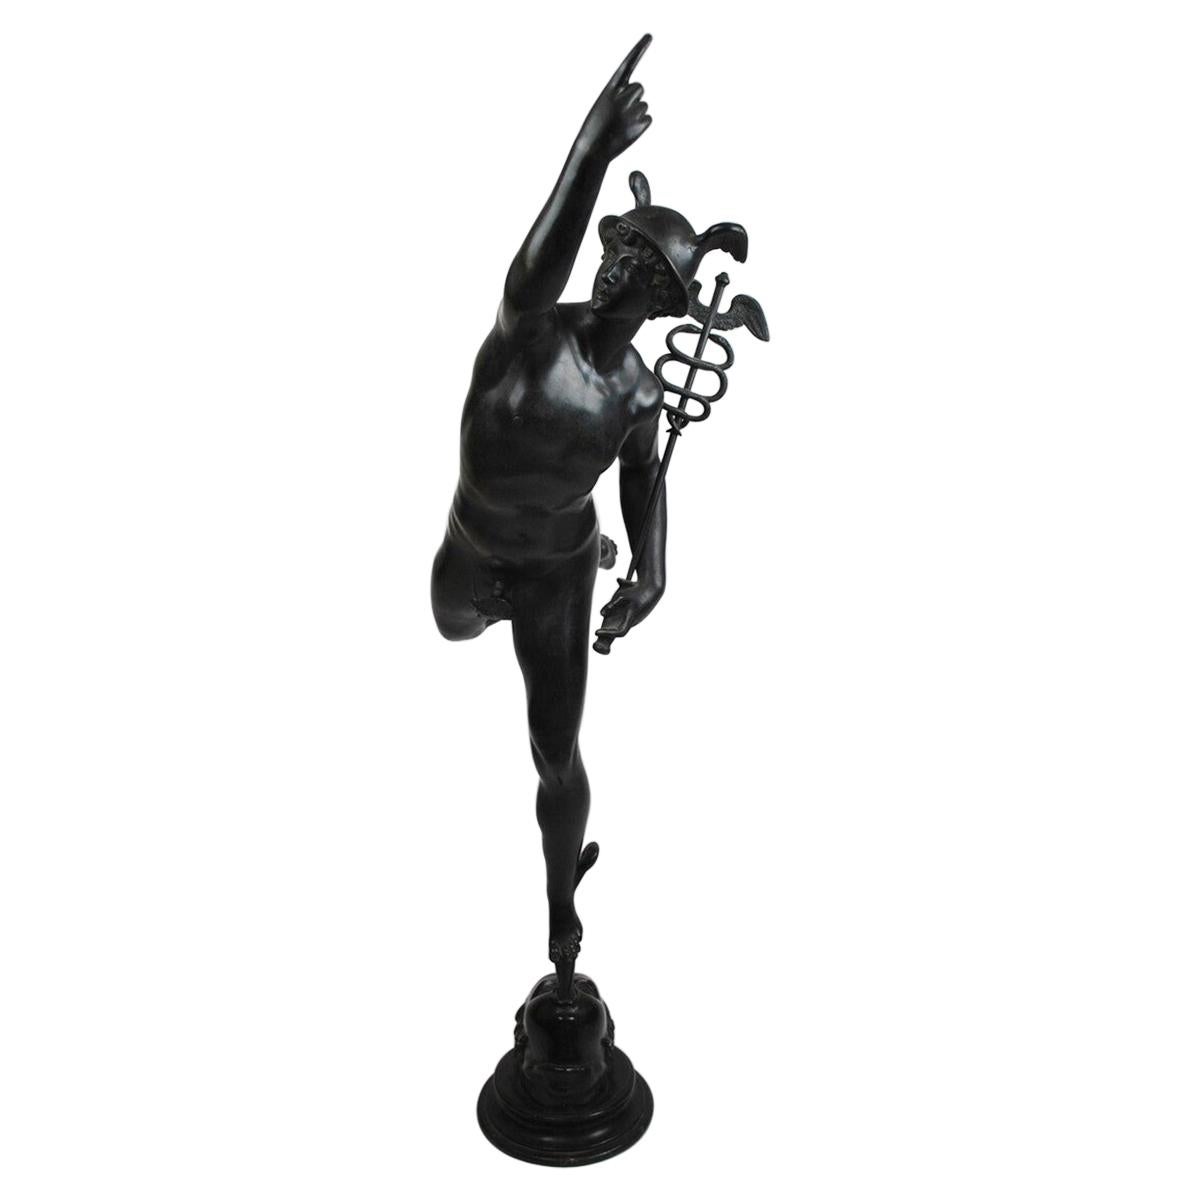 "Hermes" Large Bronze Statue, 19th